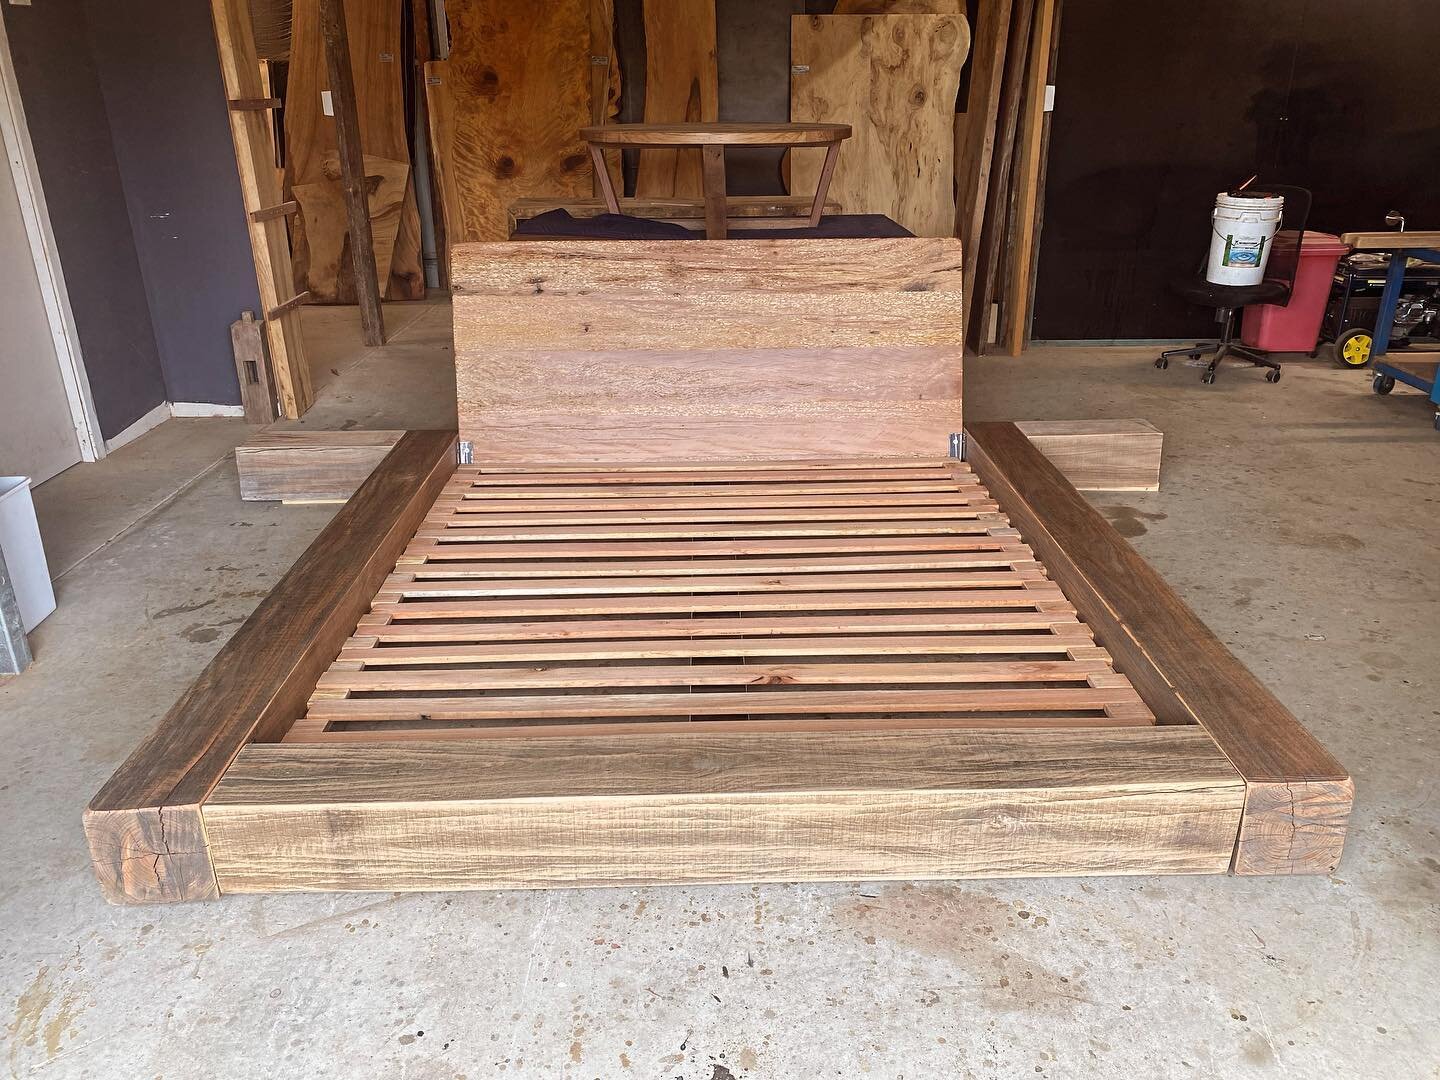 The classic &lsquo;King Dreamer Bed&rsquo; ready for it&rsquo;s new home. Hand crafted from solid seasoned brush box timber, layered with weathered grey and pink colour tones. Feel free to DM or call us for your next custom design furniture piece, do